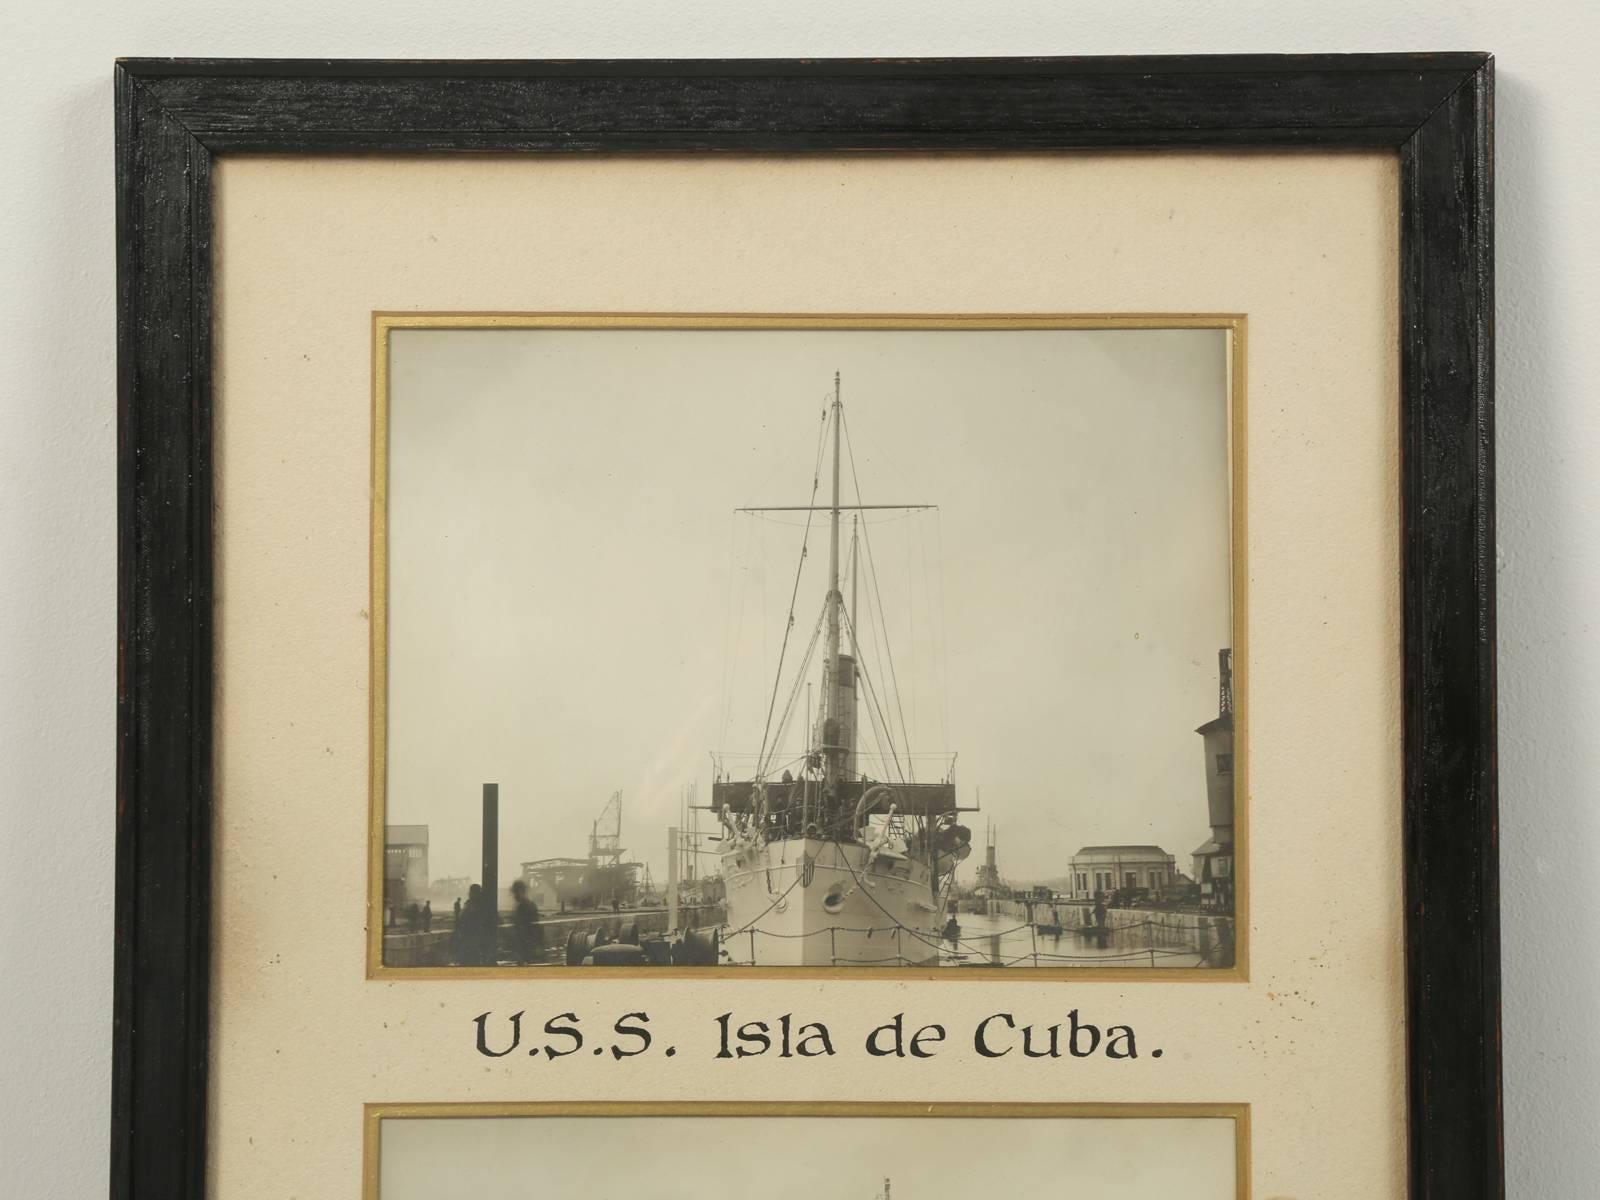 USS Isla de Cuba was a former Spanish Navy cruiser, captured by and commissioned into the United States Navy as a gunboat
The warship was built in 1886–1987 for the Spanish Navy by Sir W.G. Armstrong Mitchell & Company, Newcastle upon Tyne, in